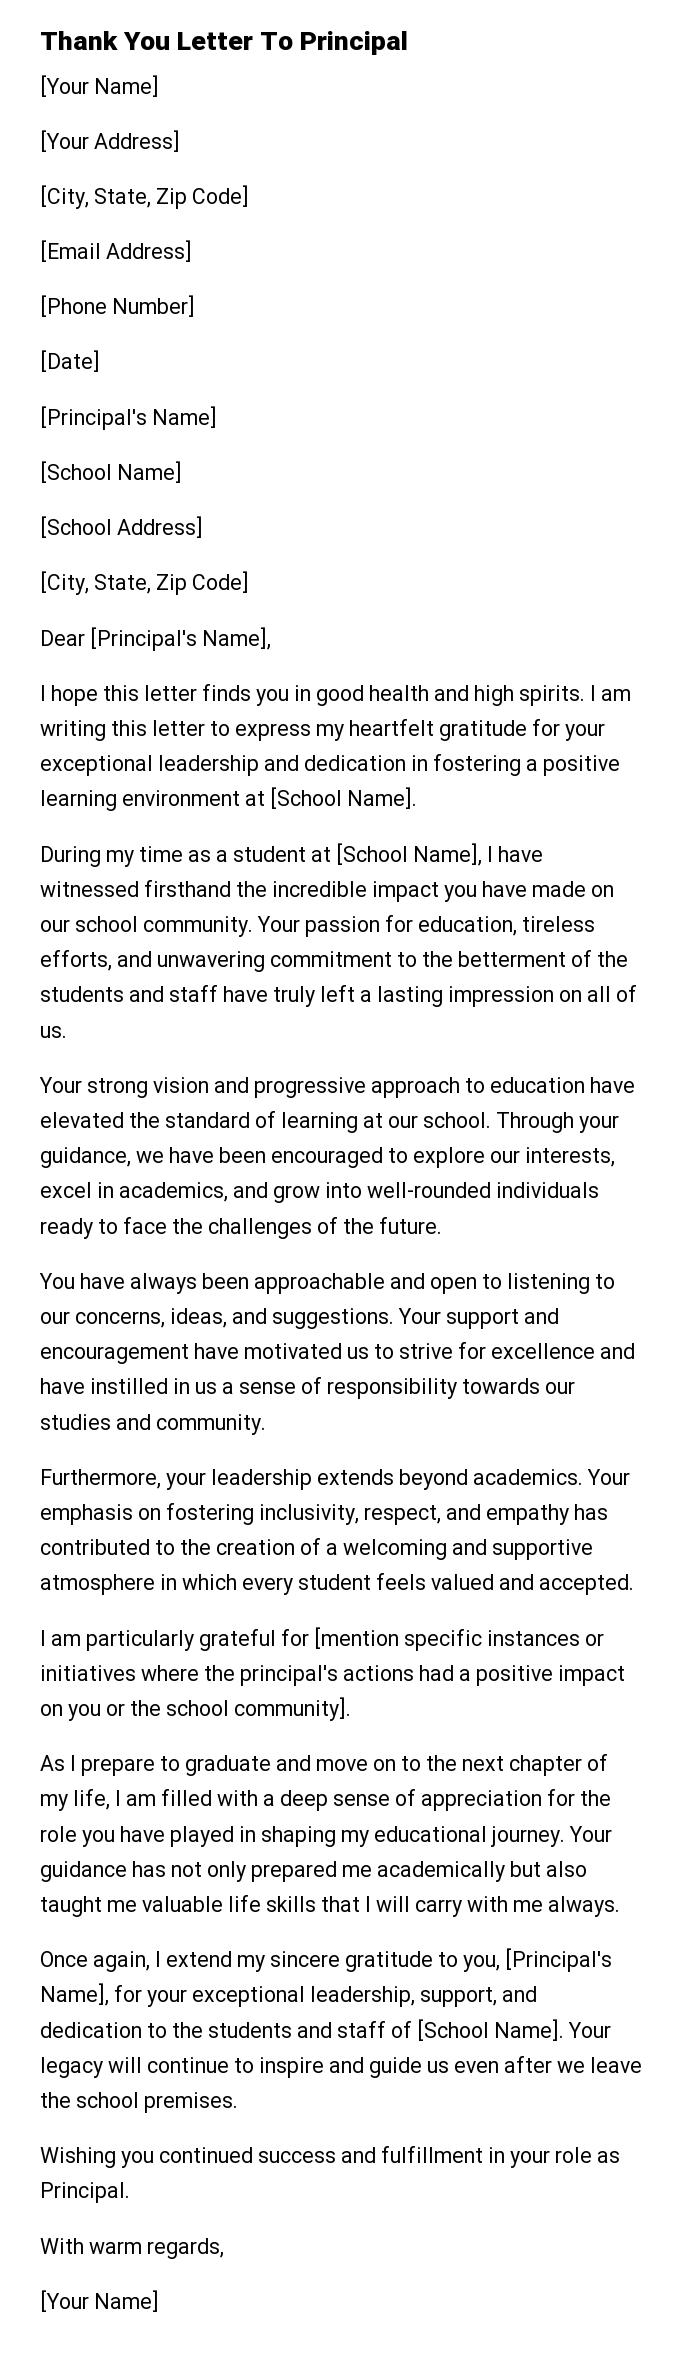 Thank You Letter To Principal